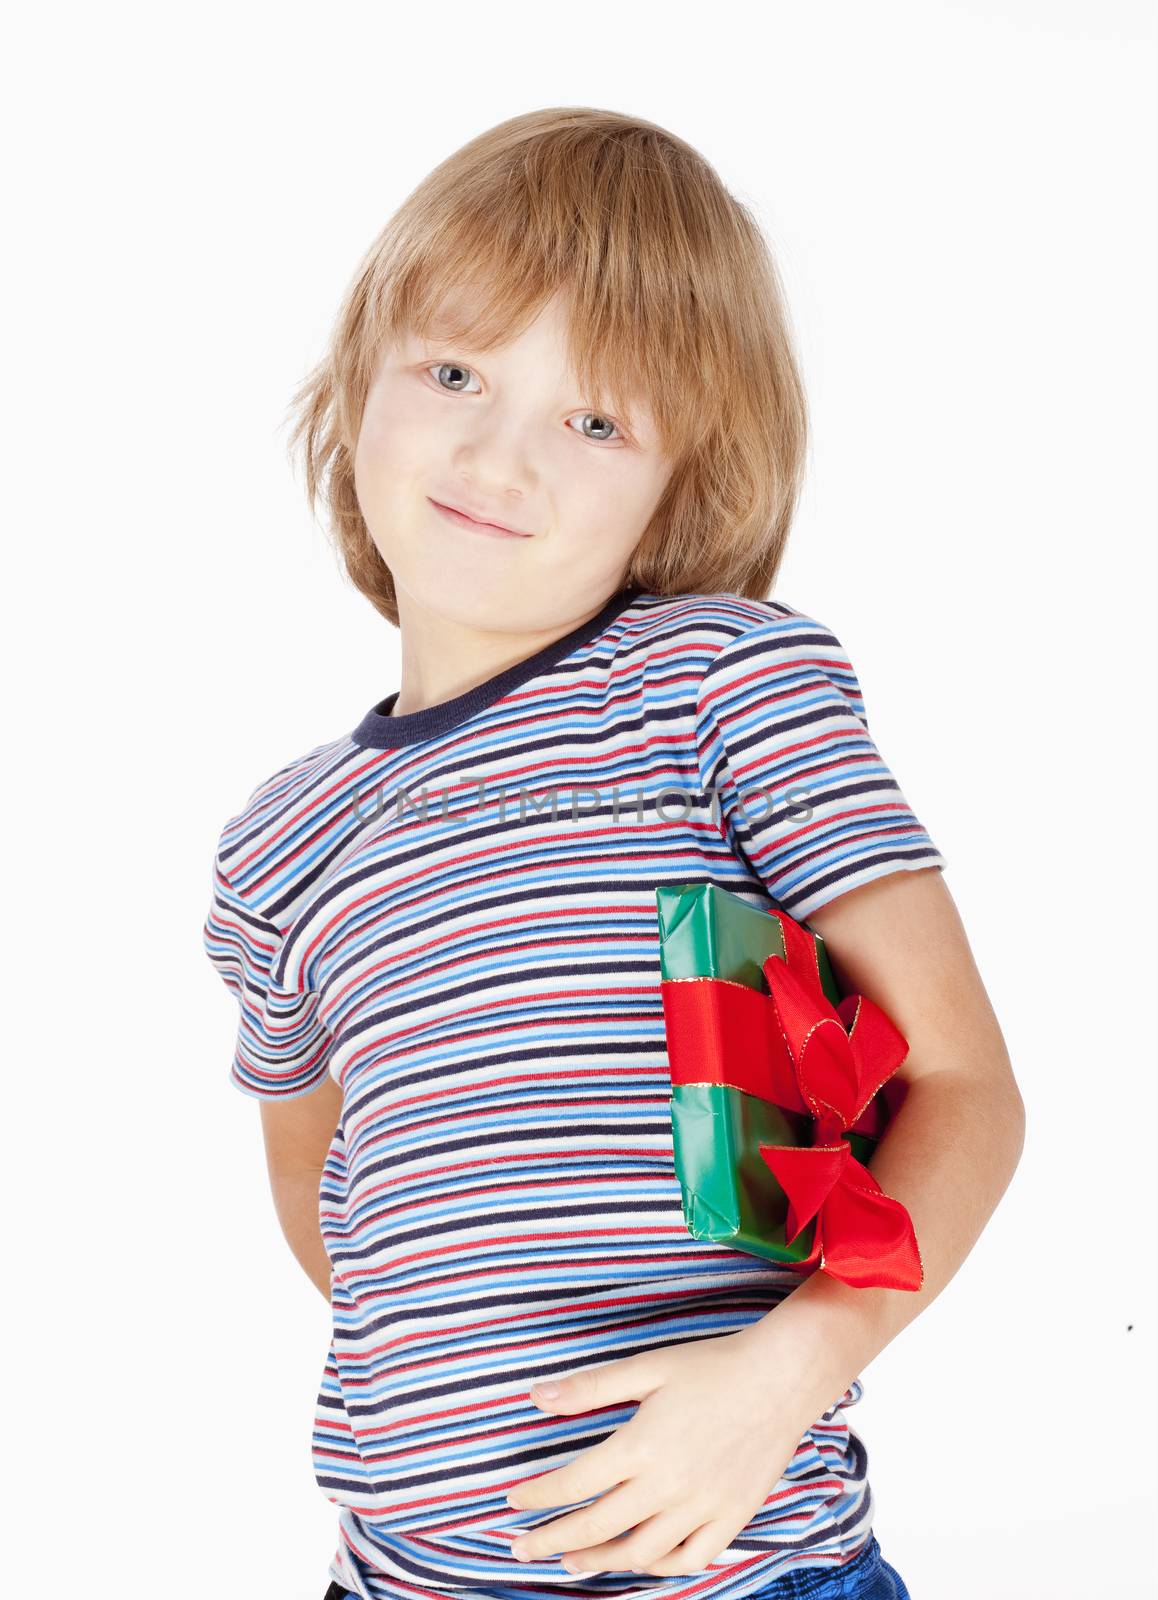 Boy Holding a Present - Isolated on White